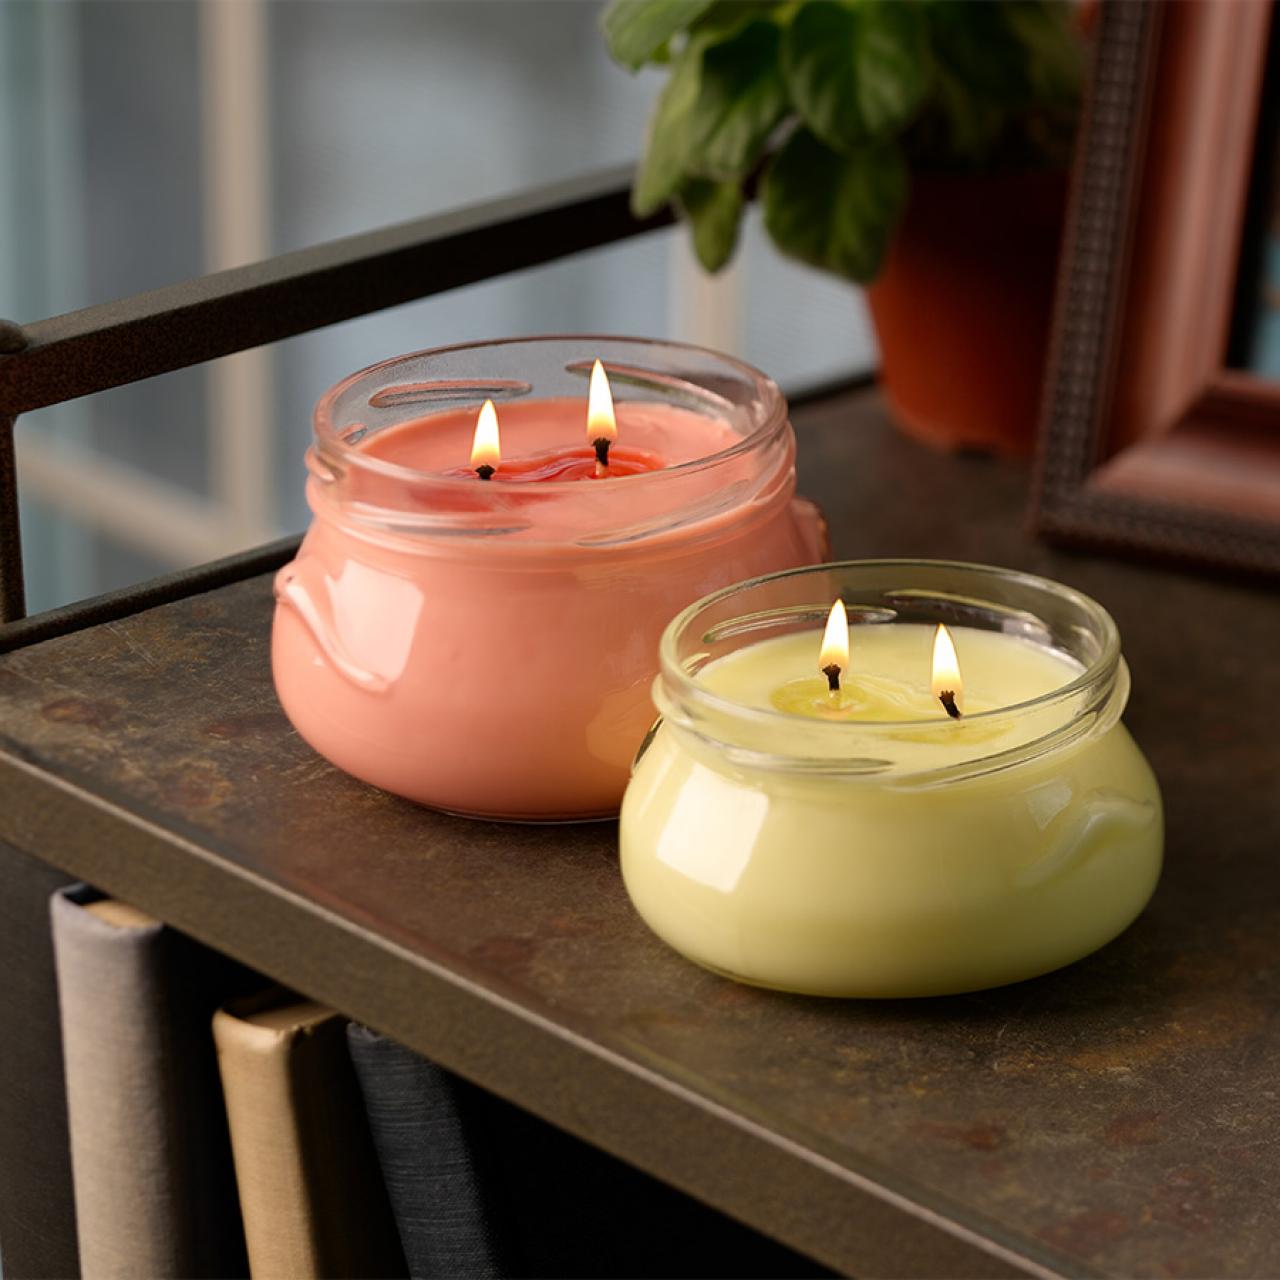 8 Best Food-Scented Candles You Can Buy Online : Food Network, FN Dish -  Behind-the-Scenes, Food Trends, and Best Recipes : Food Network